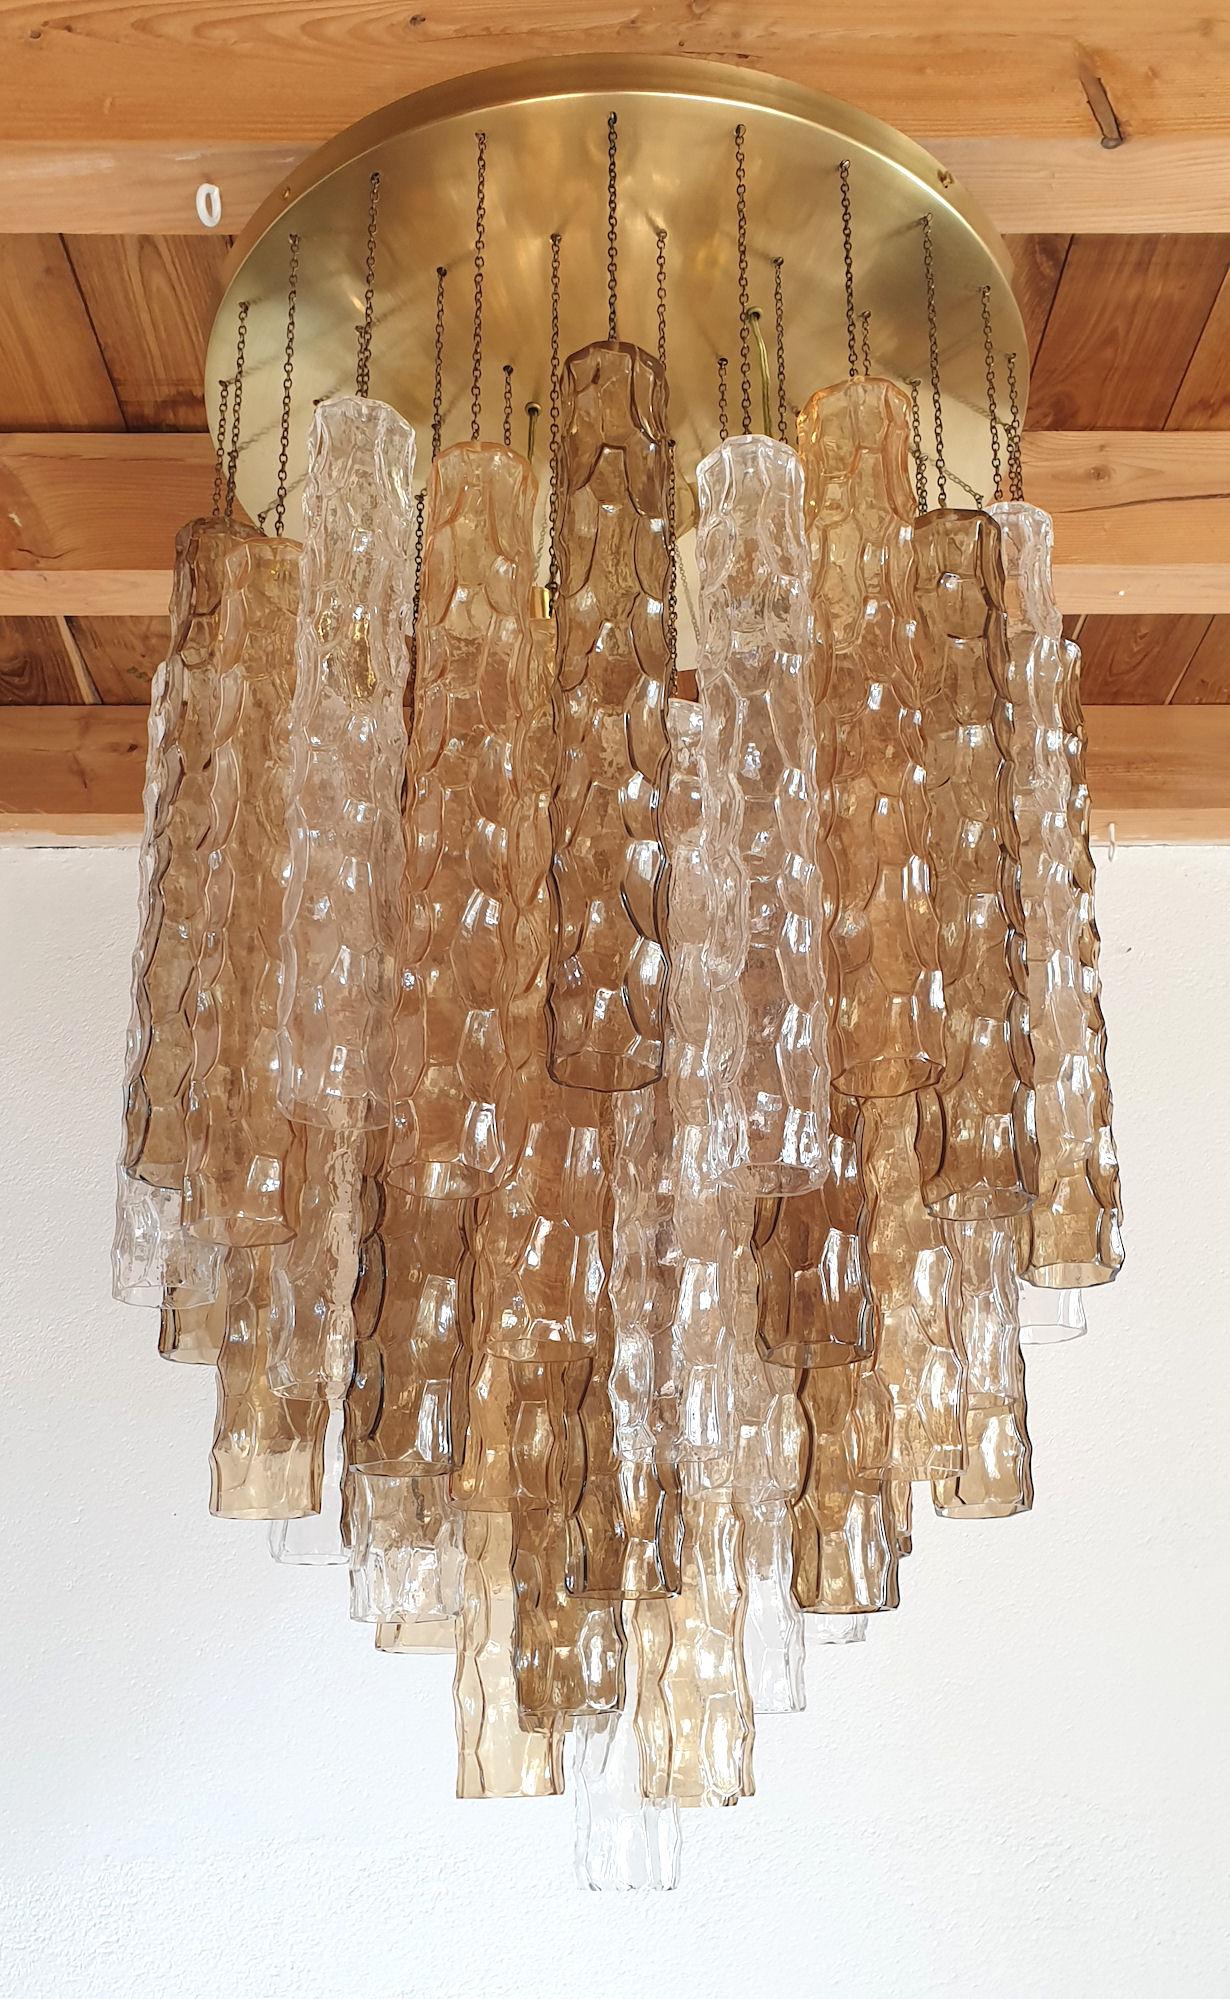 Large Mid-Century Modern Murano glass flush mount chandelier, by Mazzega, Italy, 1970s.
Made of alternating 3 colors of bamboo shaped Murano glasses: transparent, beige and brown.
Around 60 tubes of glass in excellent condition, for this 5 tiers